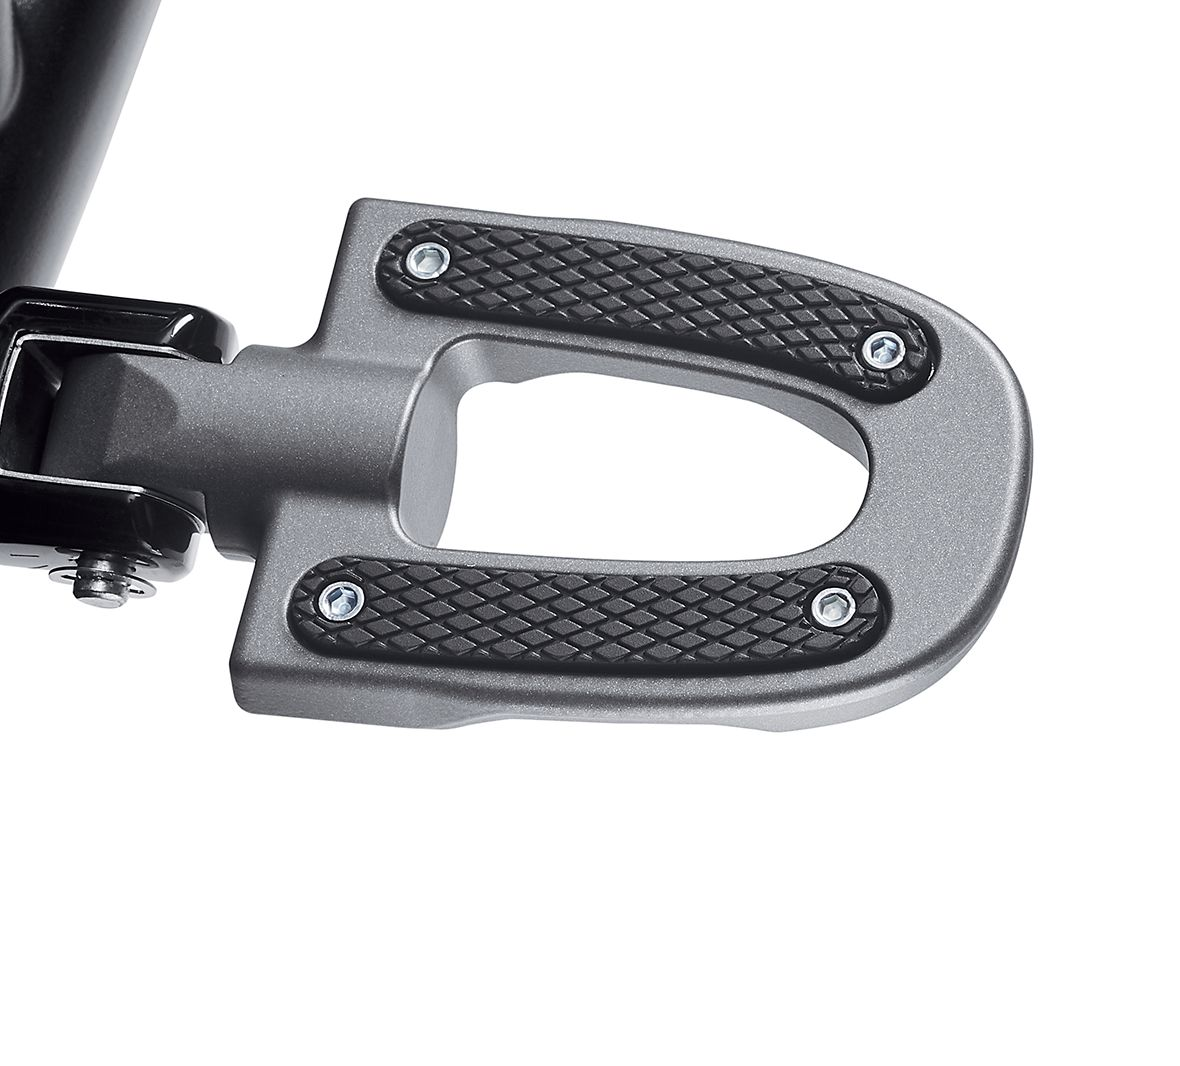 Harley-Davidson® Endgame Passenger Footpegs - GRAPHITE - 50501643 -Softail.  Push your custom style to the edge. The Endgame™ collection is defined by its slotted design and high-tech, industrial look.